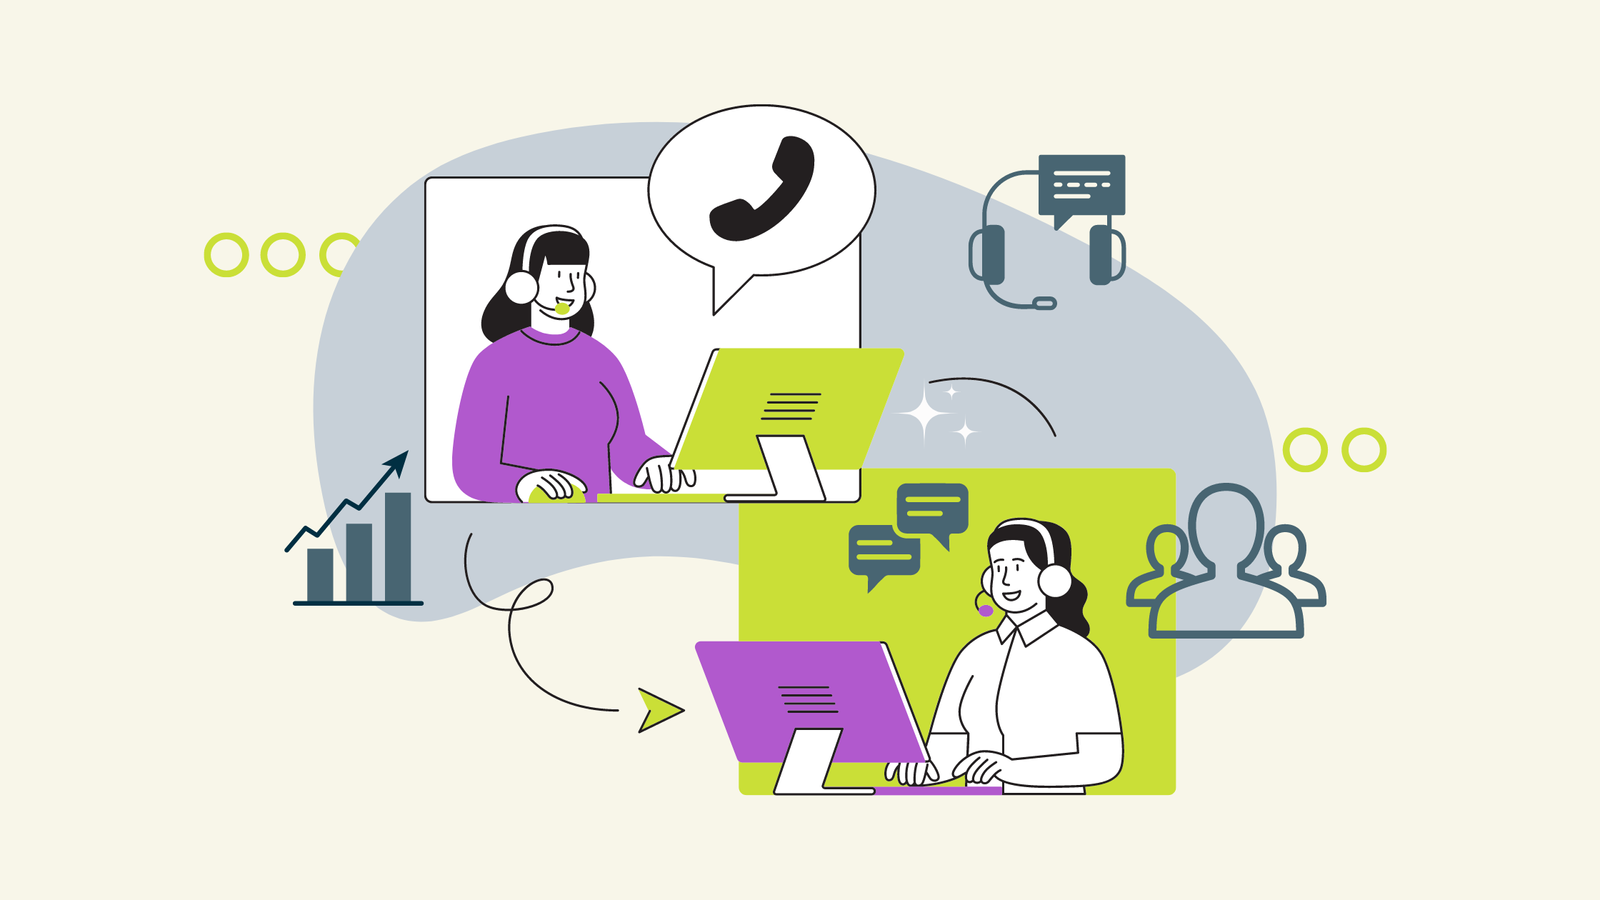 Graphic of two people sitting behind a comupter with a headset on talking. With some other icons around them which have to do with providing customer support.